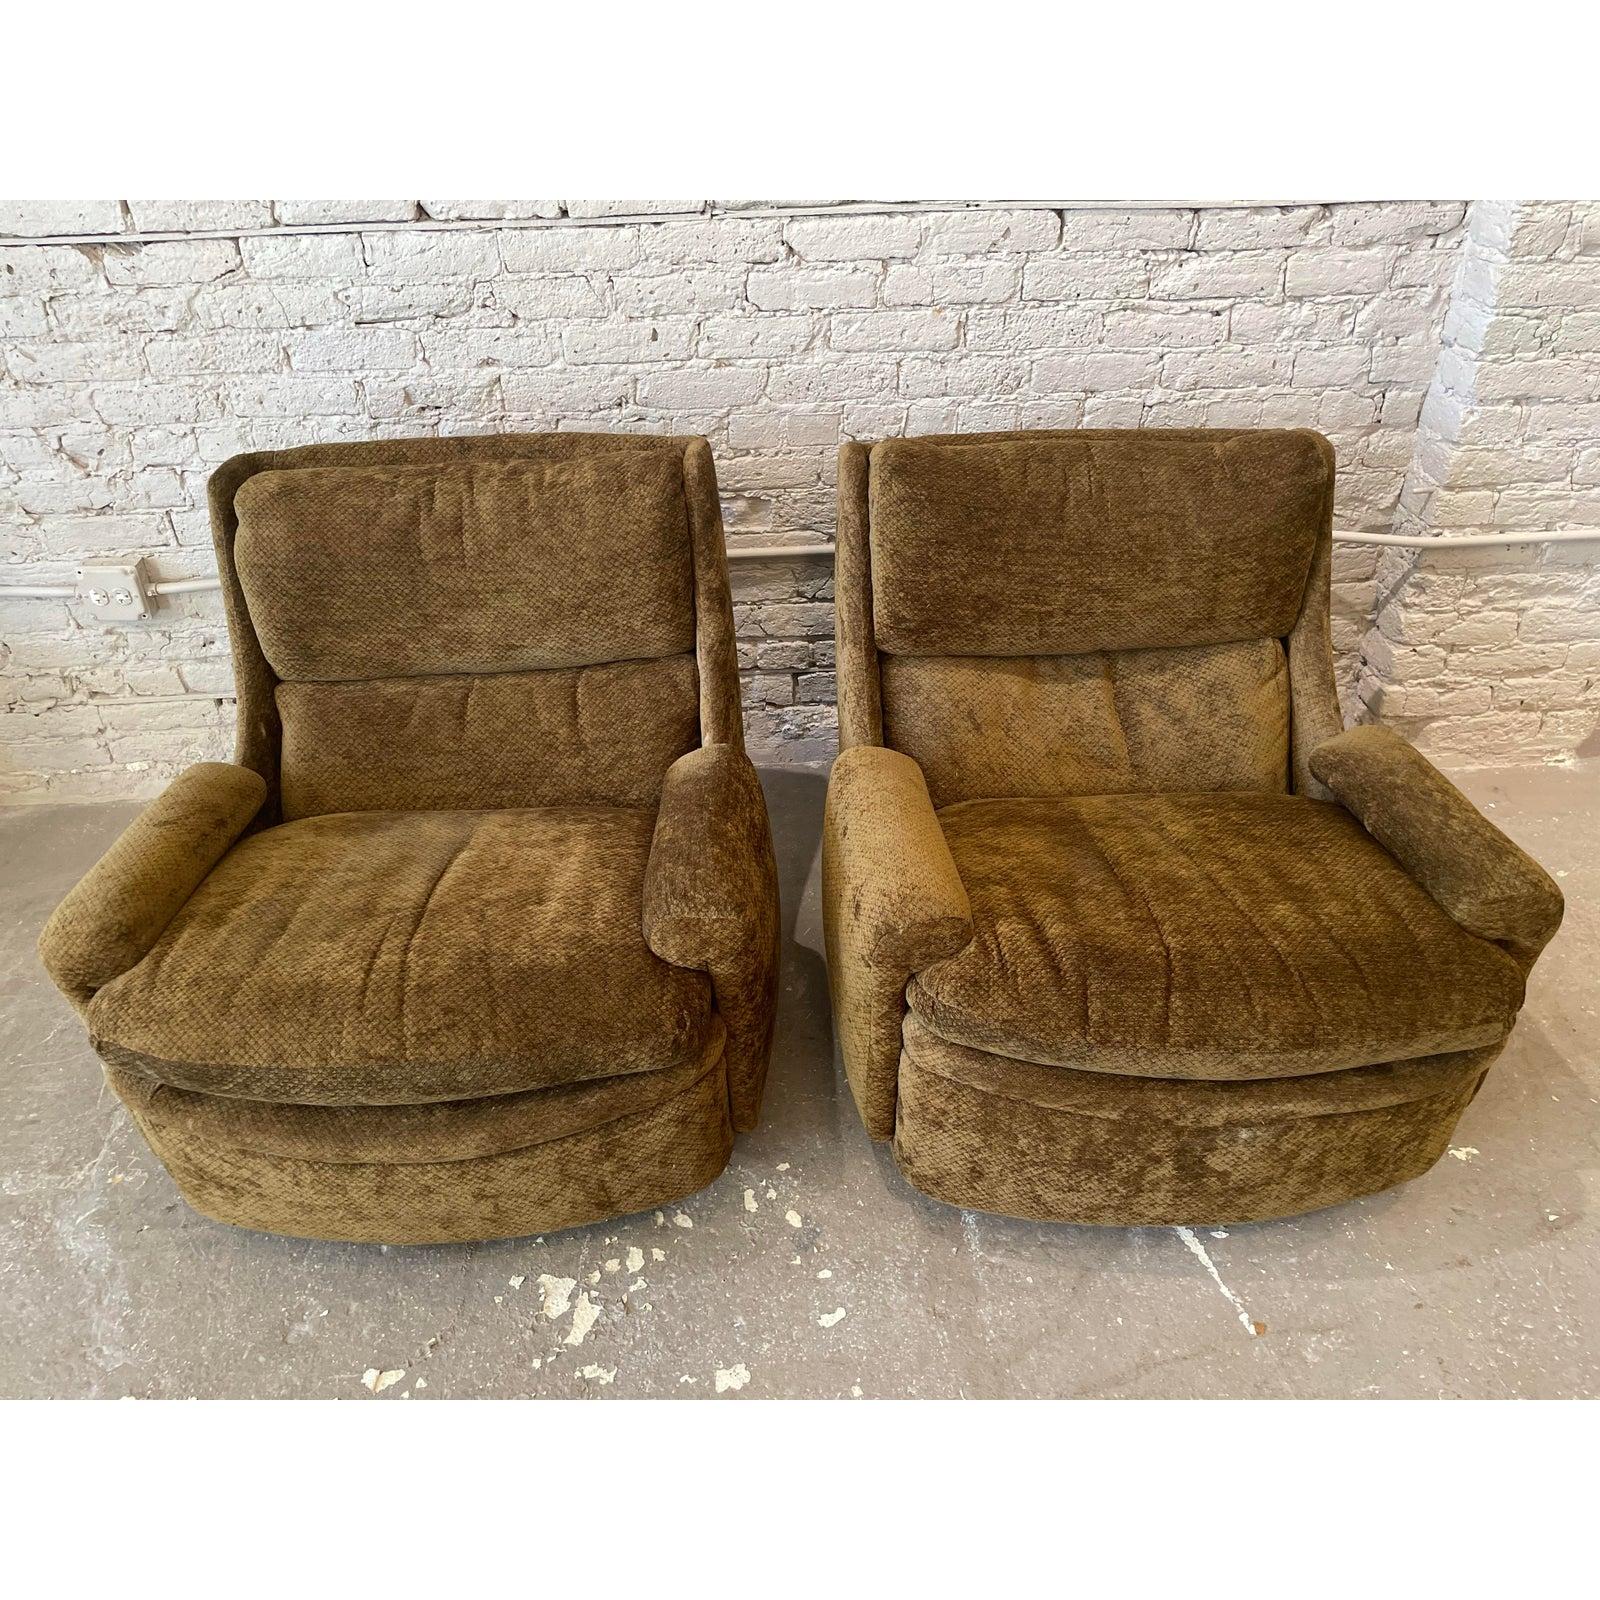 Fabric 1980s Postmodern Sculptural Arc Chairs - a Pair For Sale